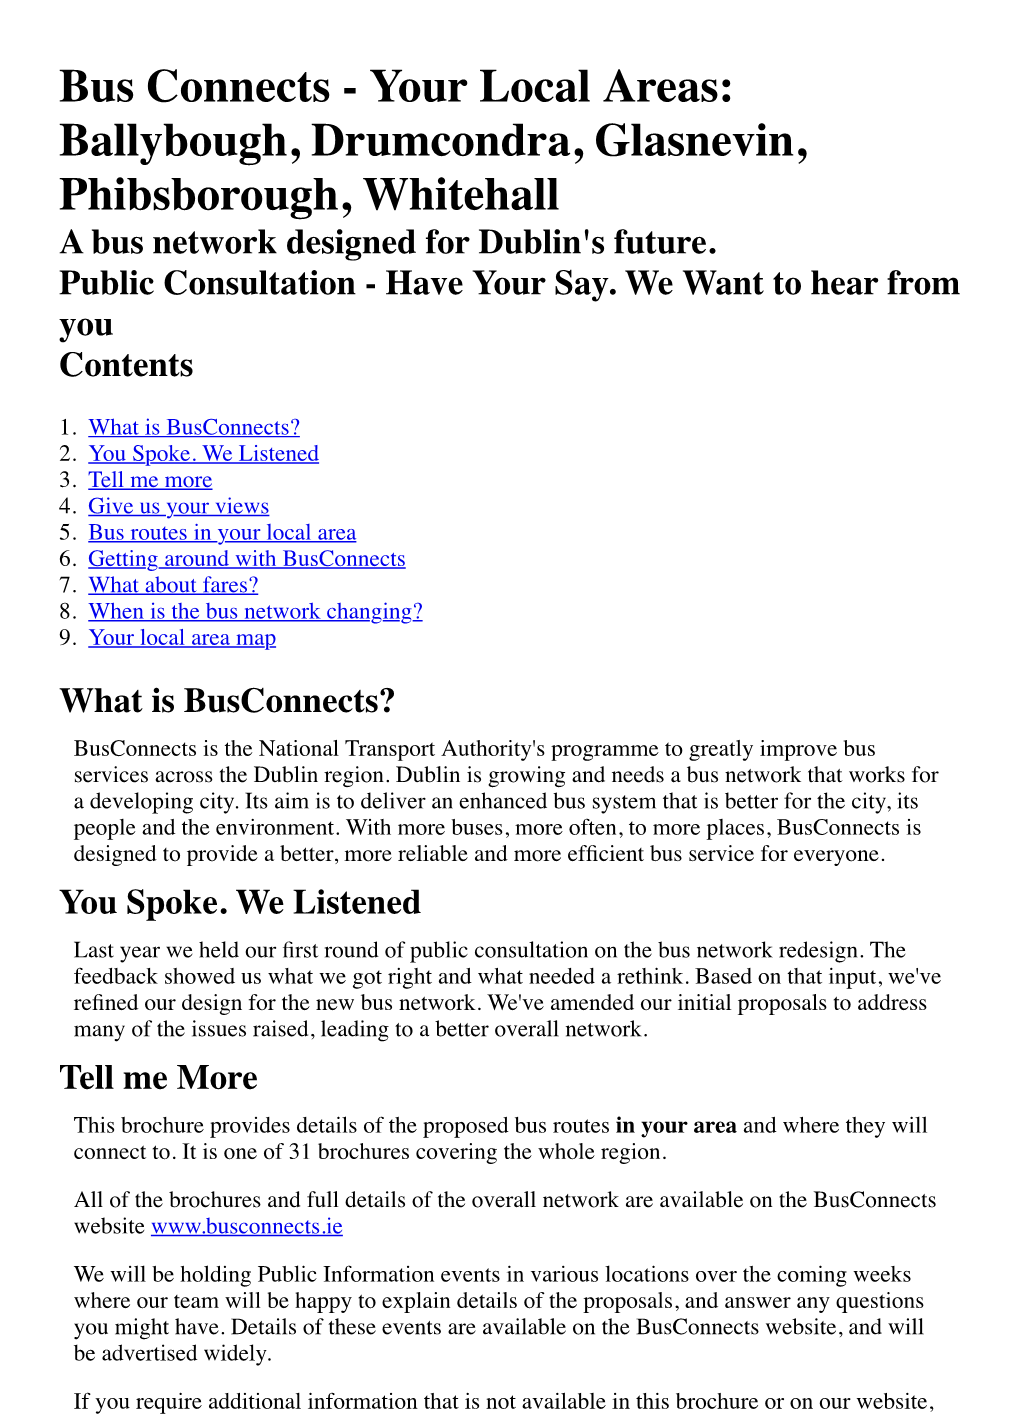 Bus Connects - Your Local Areas: Ballybough, Drumcondra, Glasnevin, Phibsborough, Whitehall a Bus Network Designed for Dublin's Future